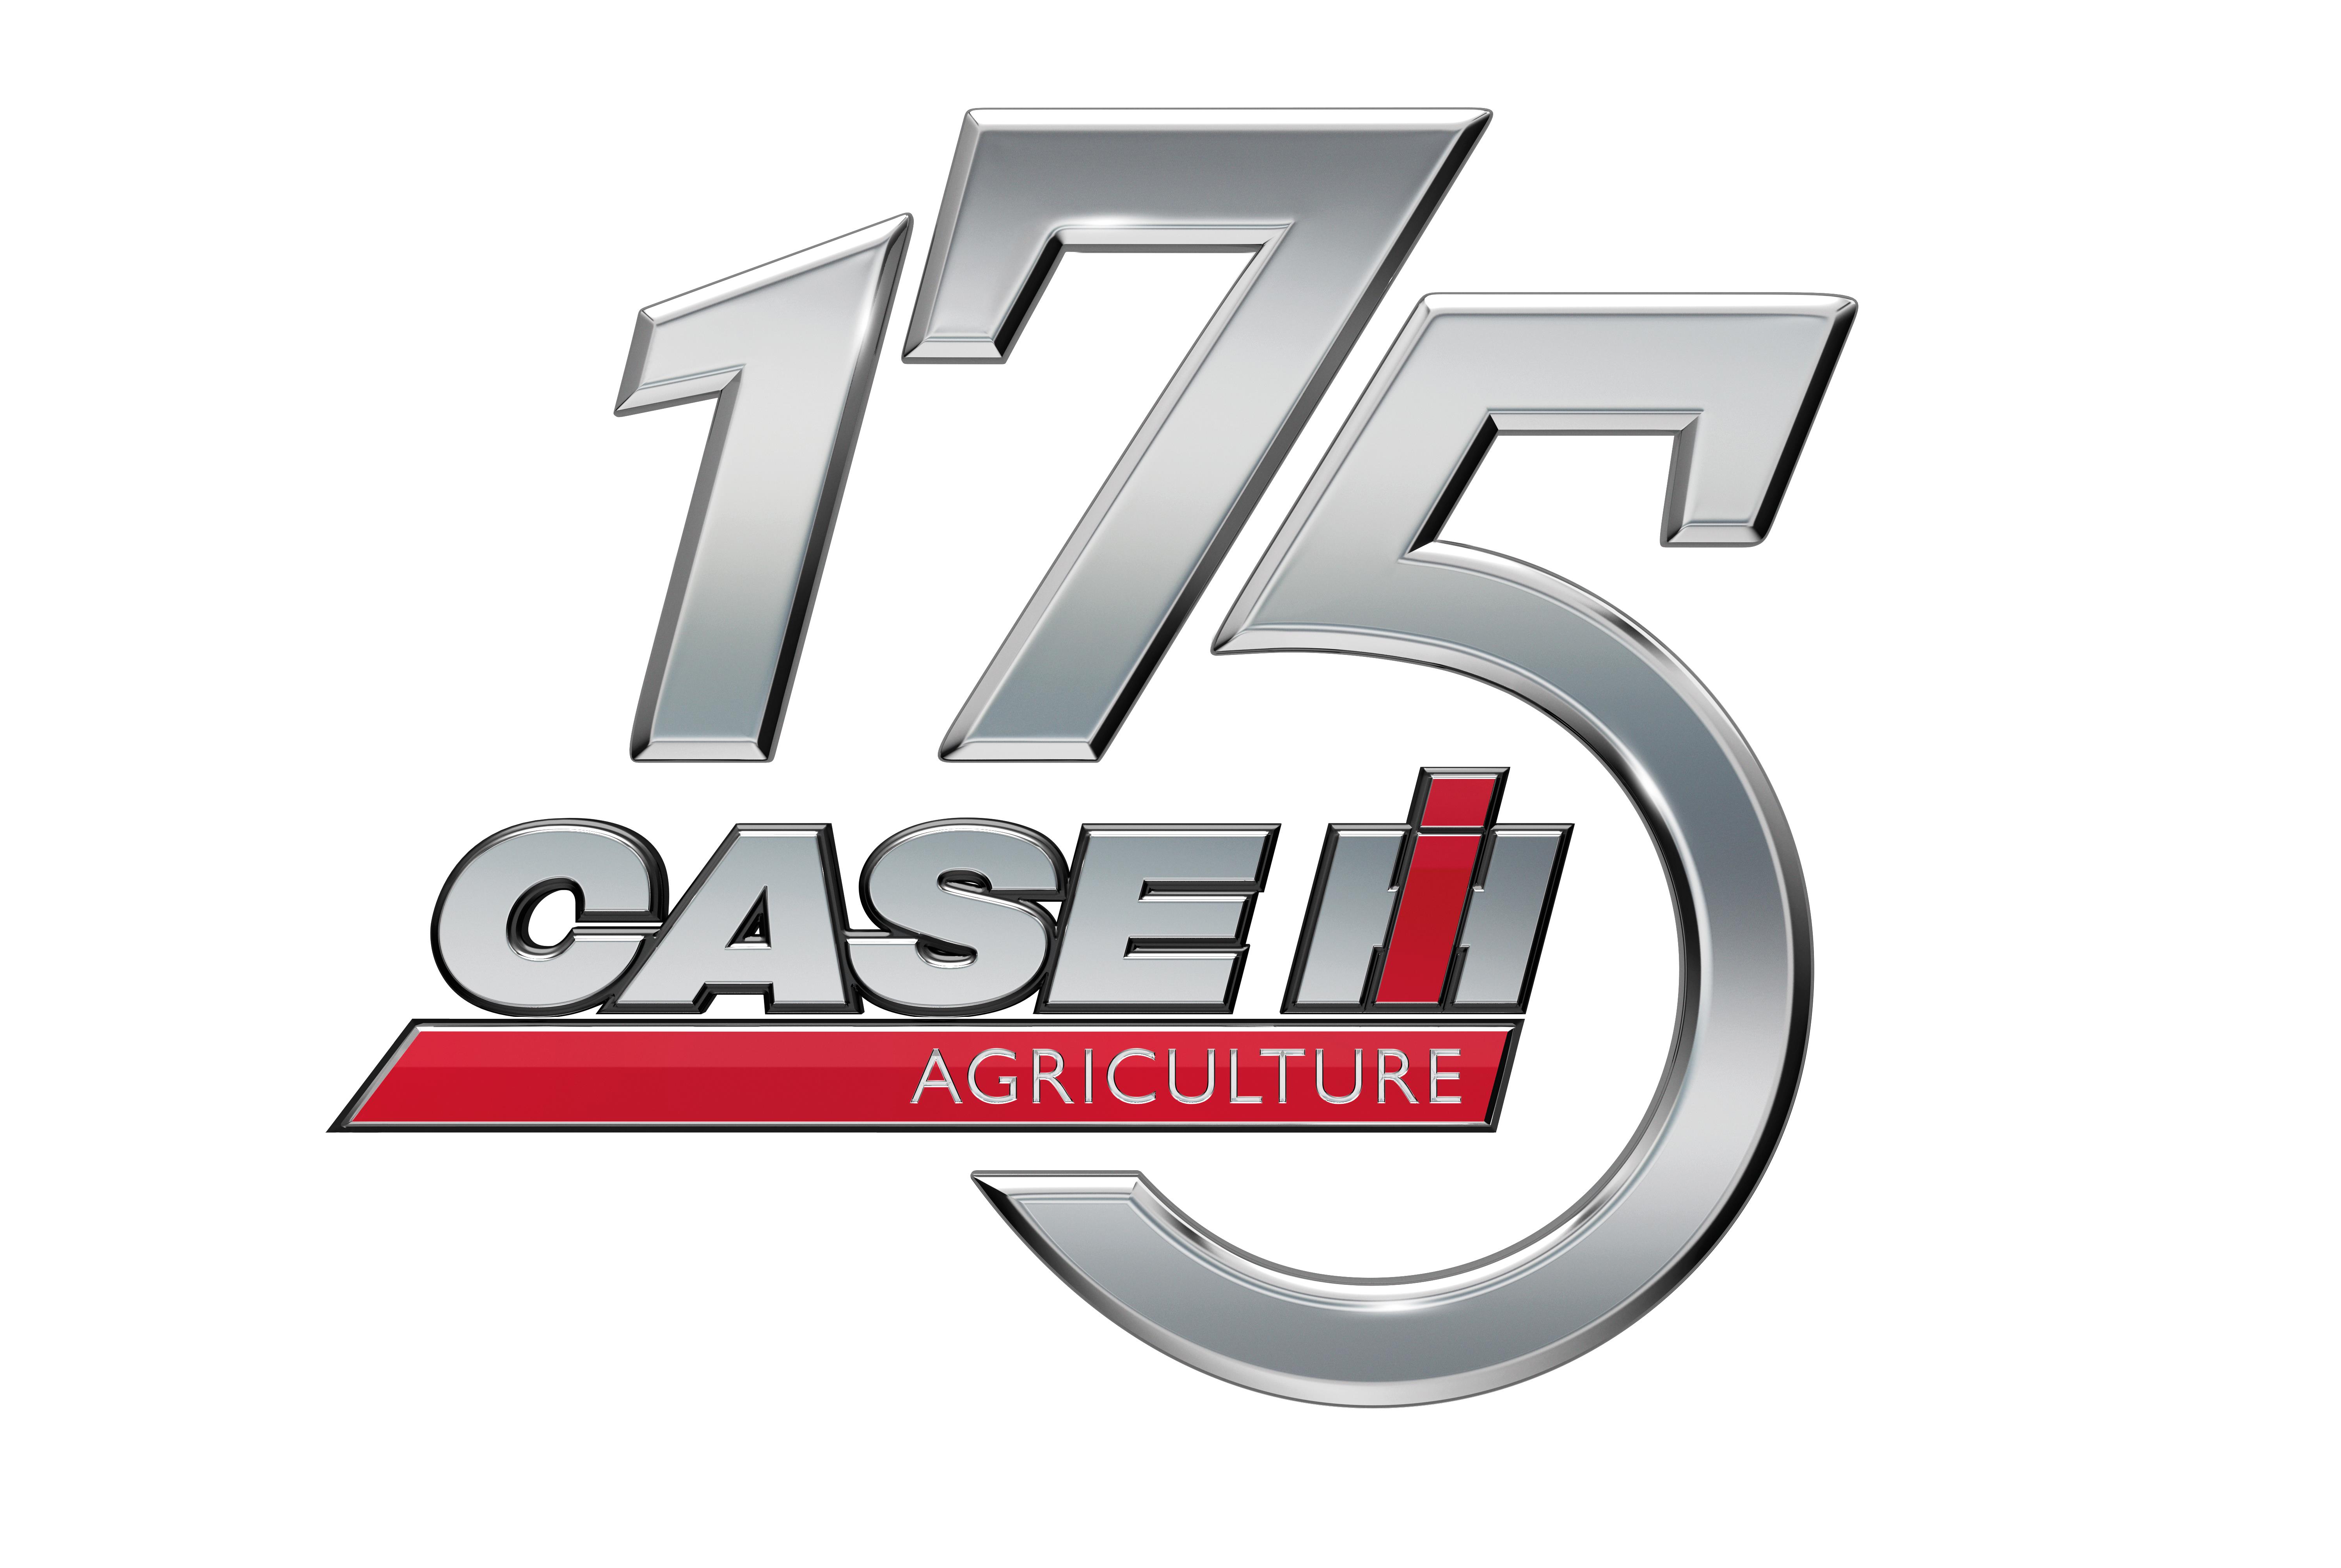 CASE IH CELEBRATES 175 YEARS AT THE CUTTING EDGE OF AGRICULTURAL EQUIPMENT PRODUCTION IN 2017